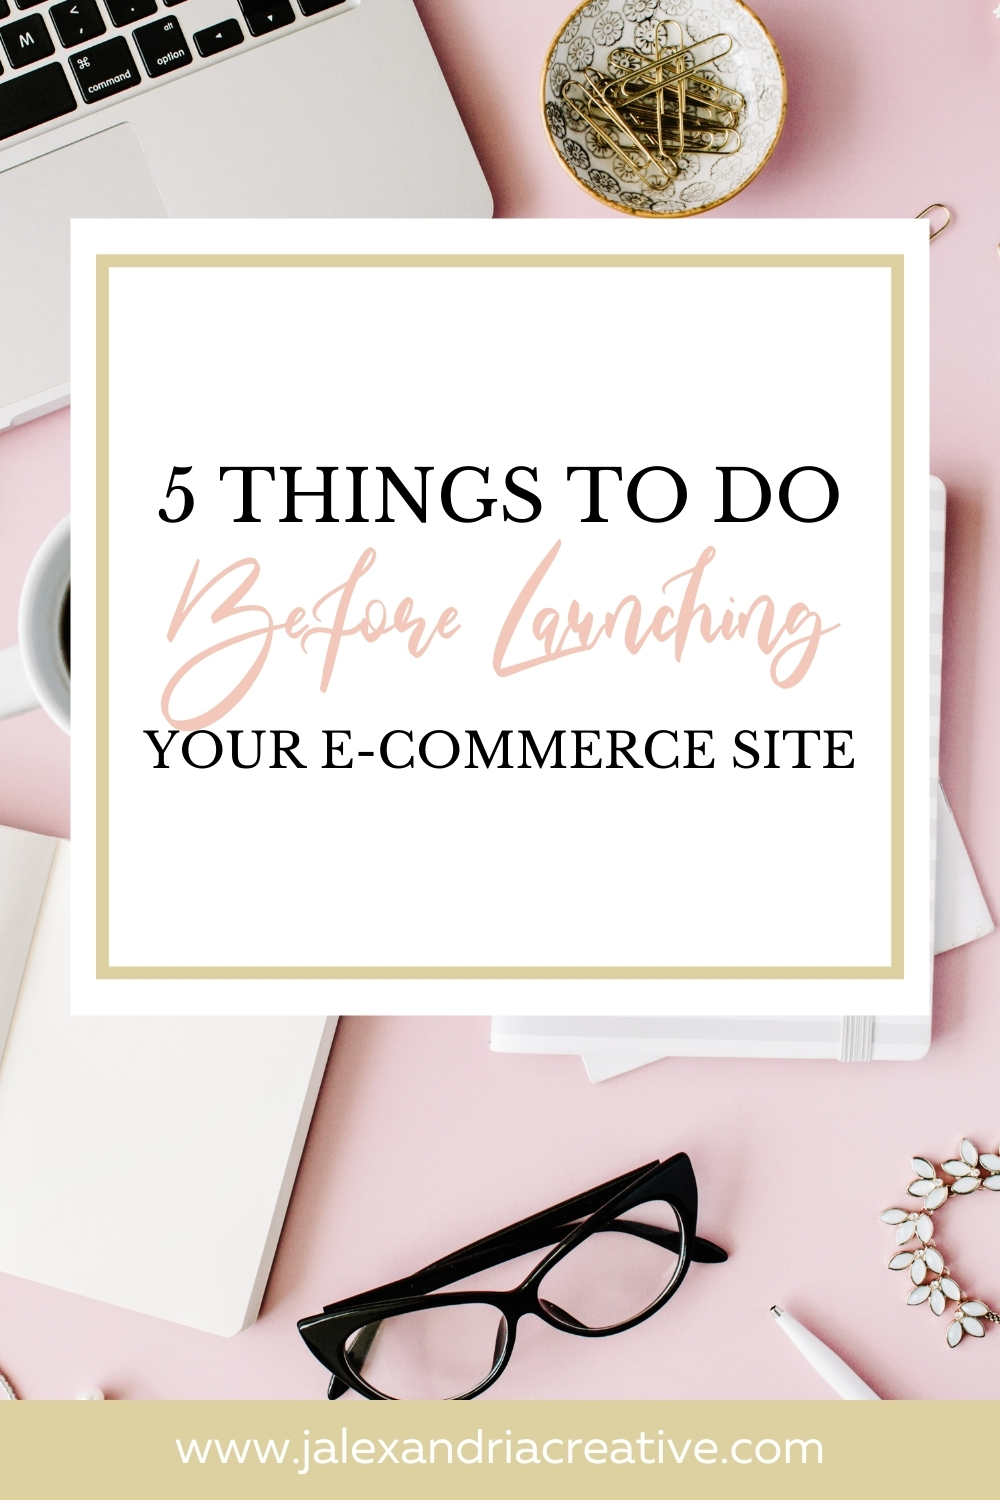 Planning an e-commerce website? Here's 5 things to do before launching your e-commerce website